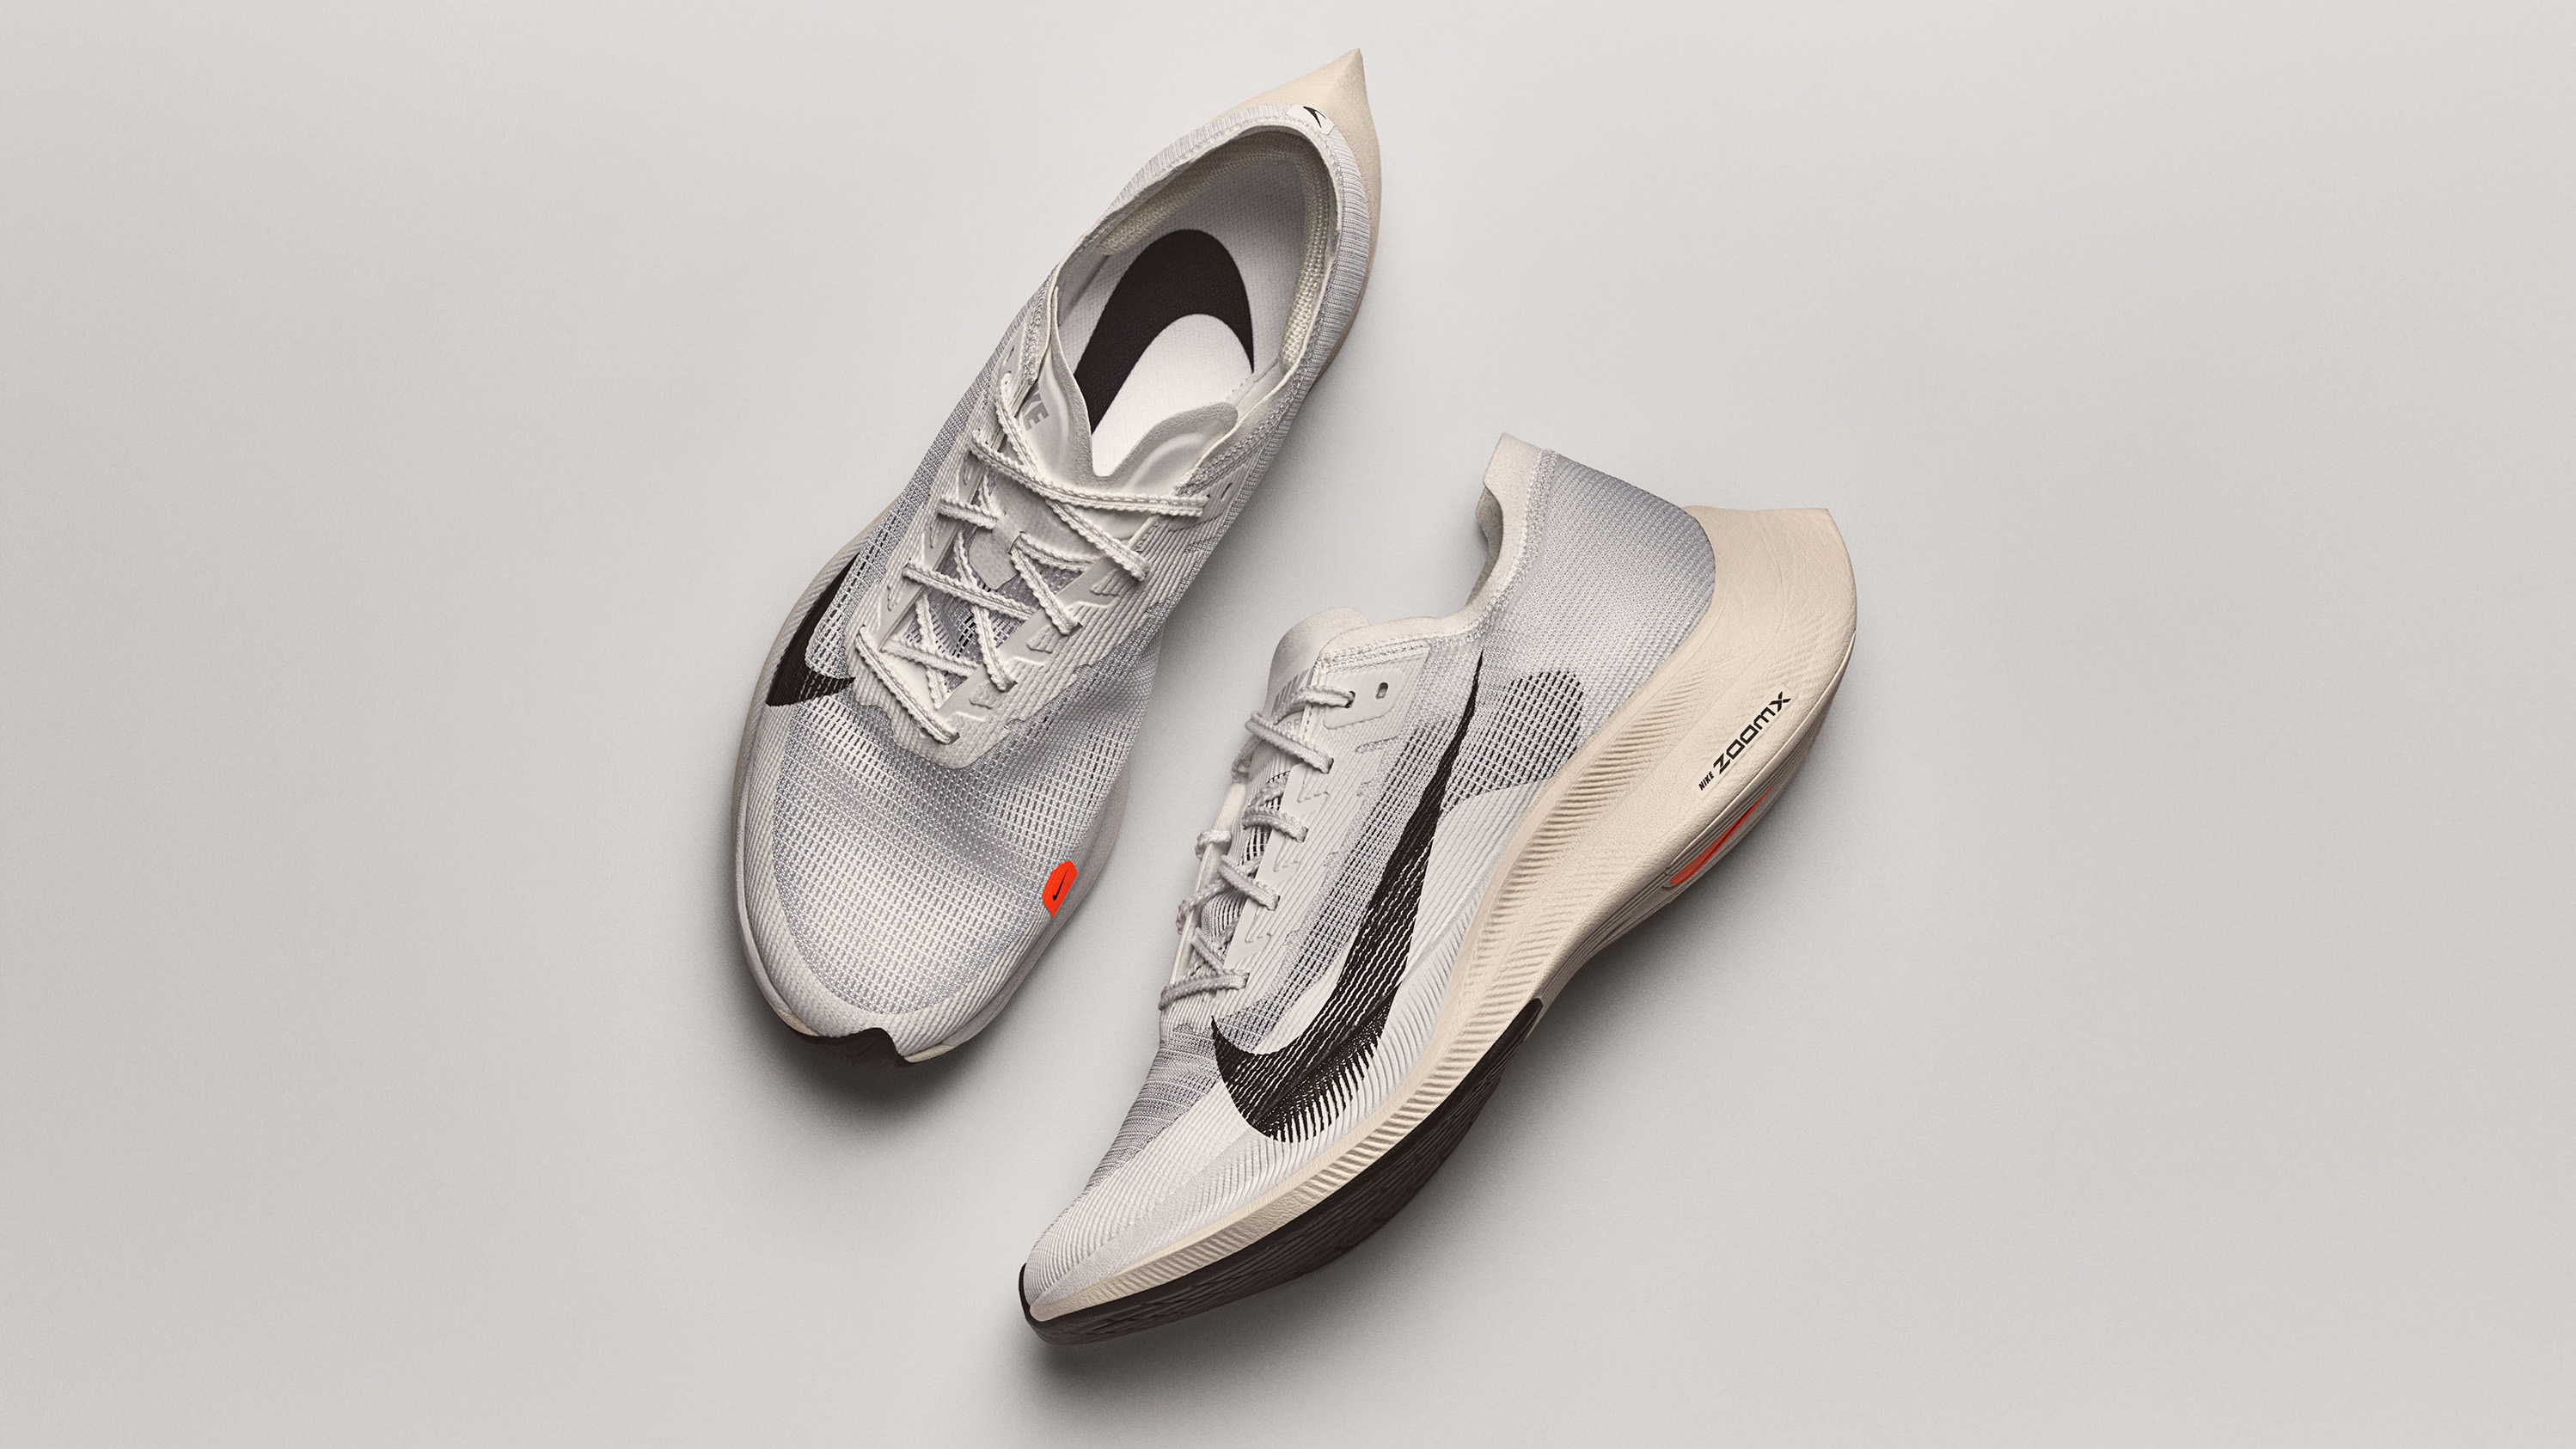 Nike ZoomX Vaporfly Next% Running Shoes | SportsShoes.com